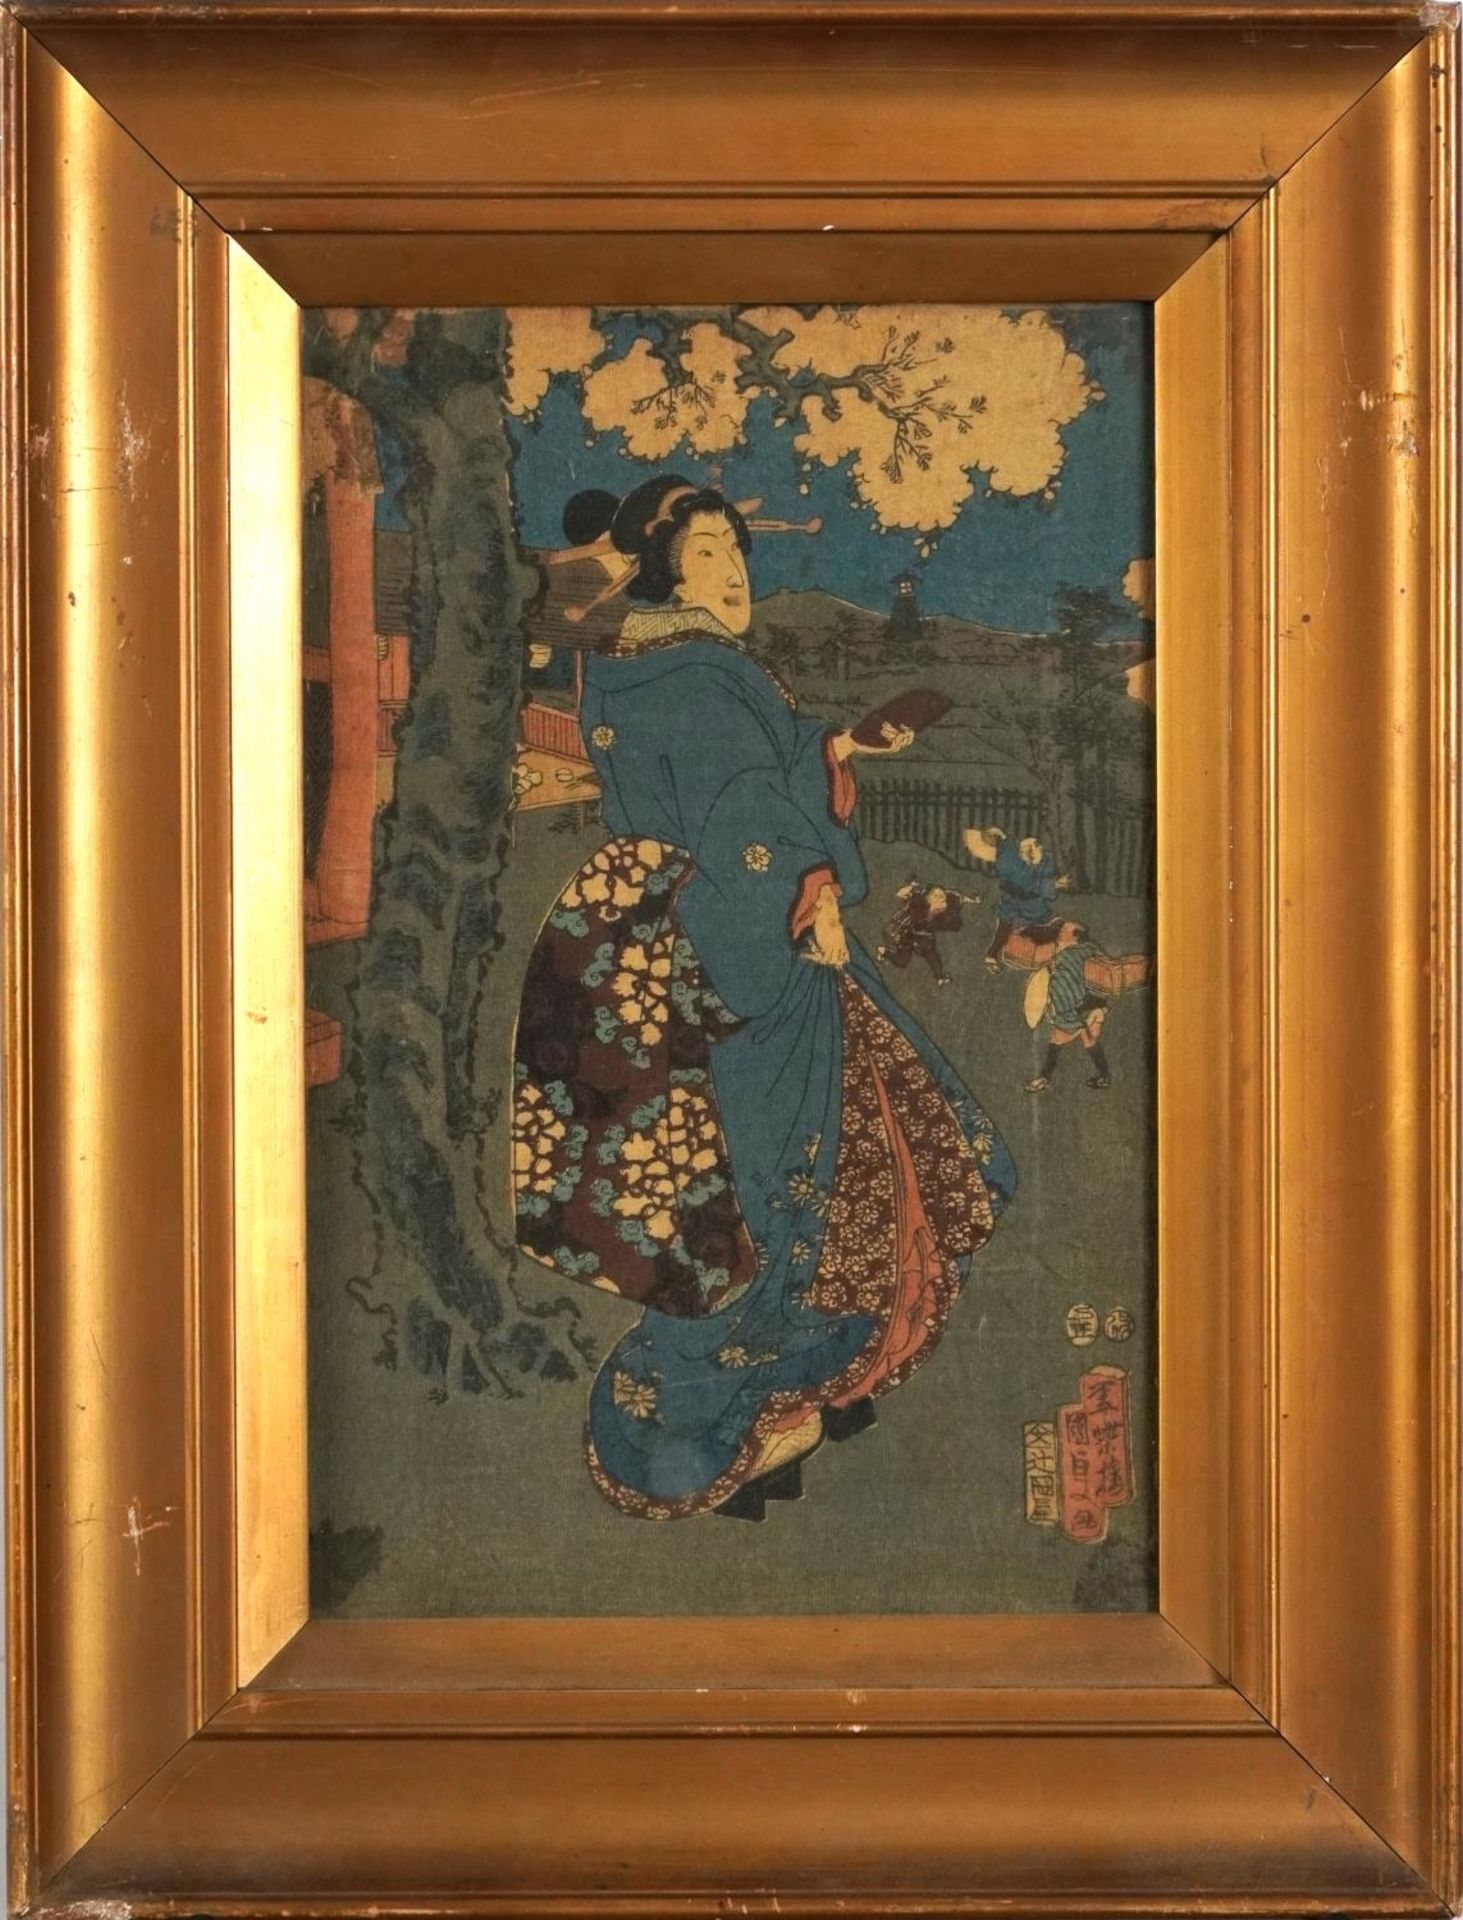 Geishas and children playing, pair of Japanese crepe paper pictures, mounted, framed and glazed, - Image 7 of 9